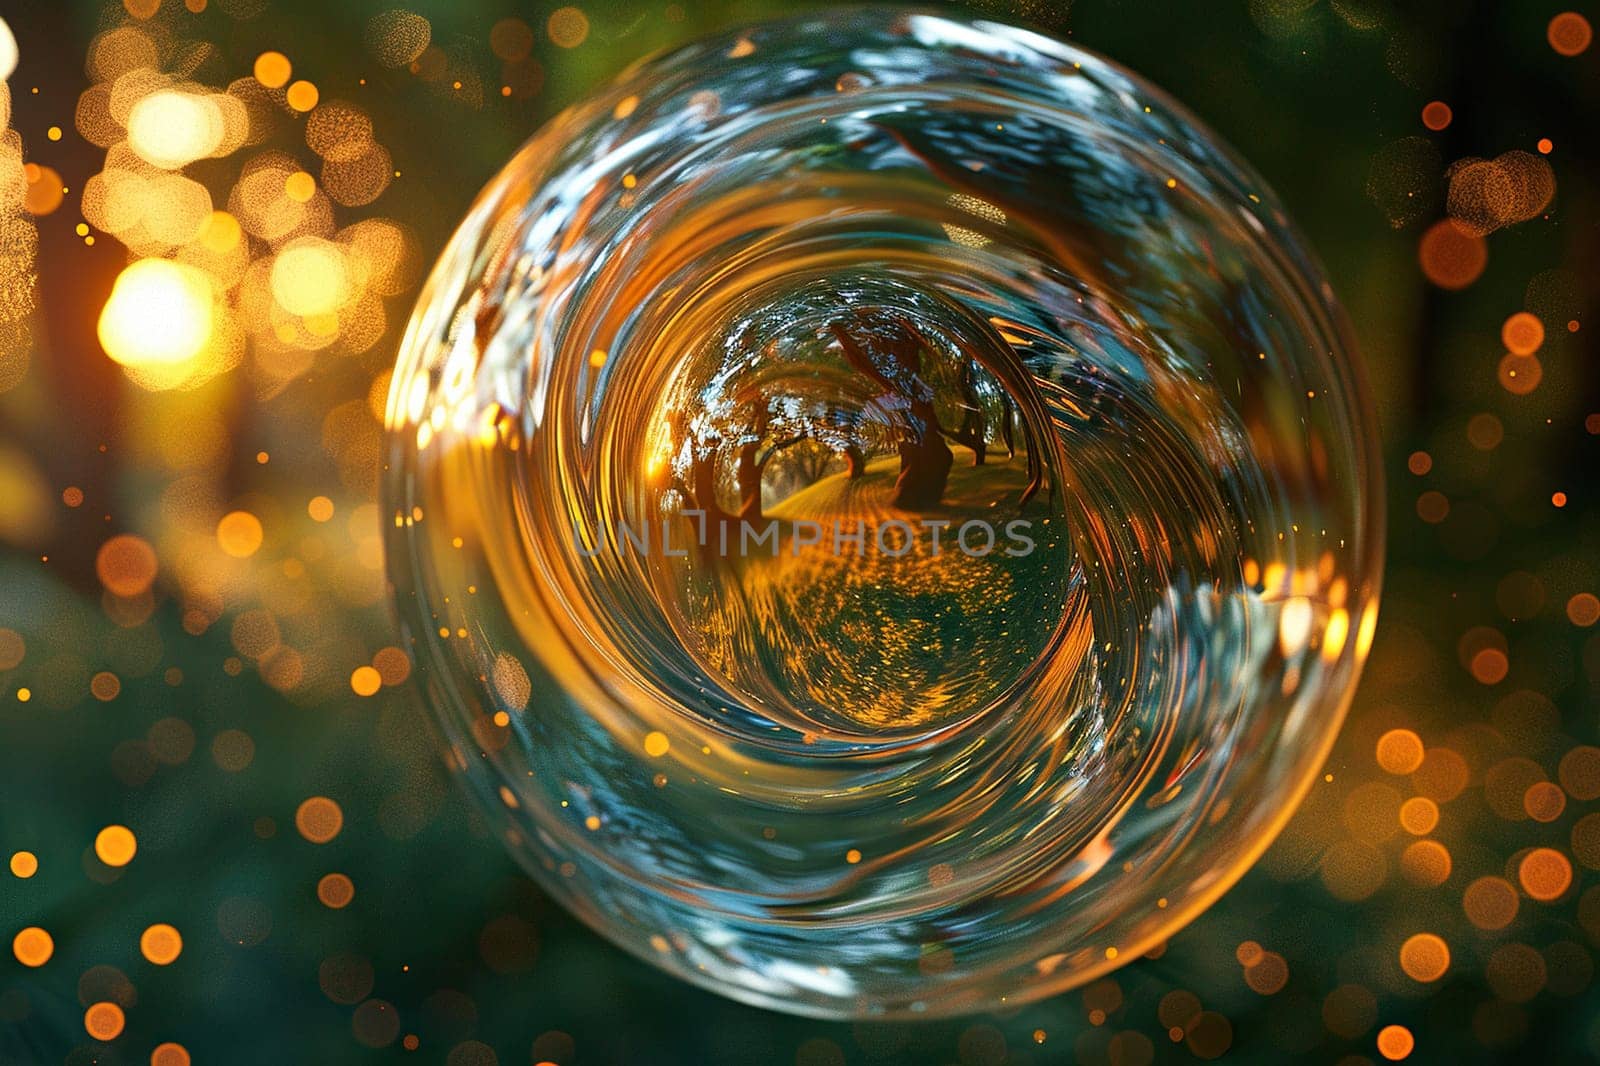 Transparent glass sphere with nature reflection against golden bokeh background. Environment concept.